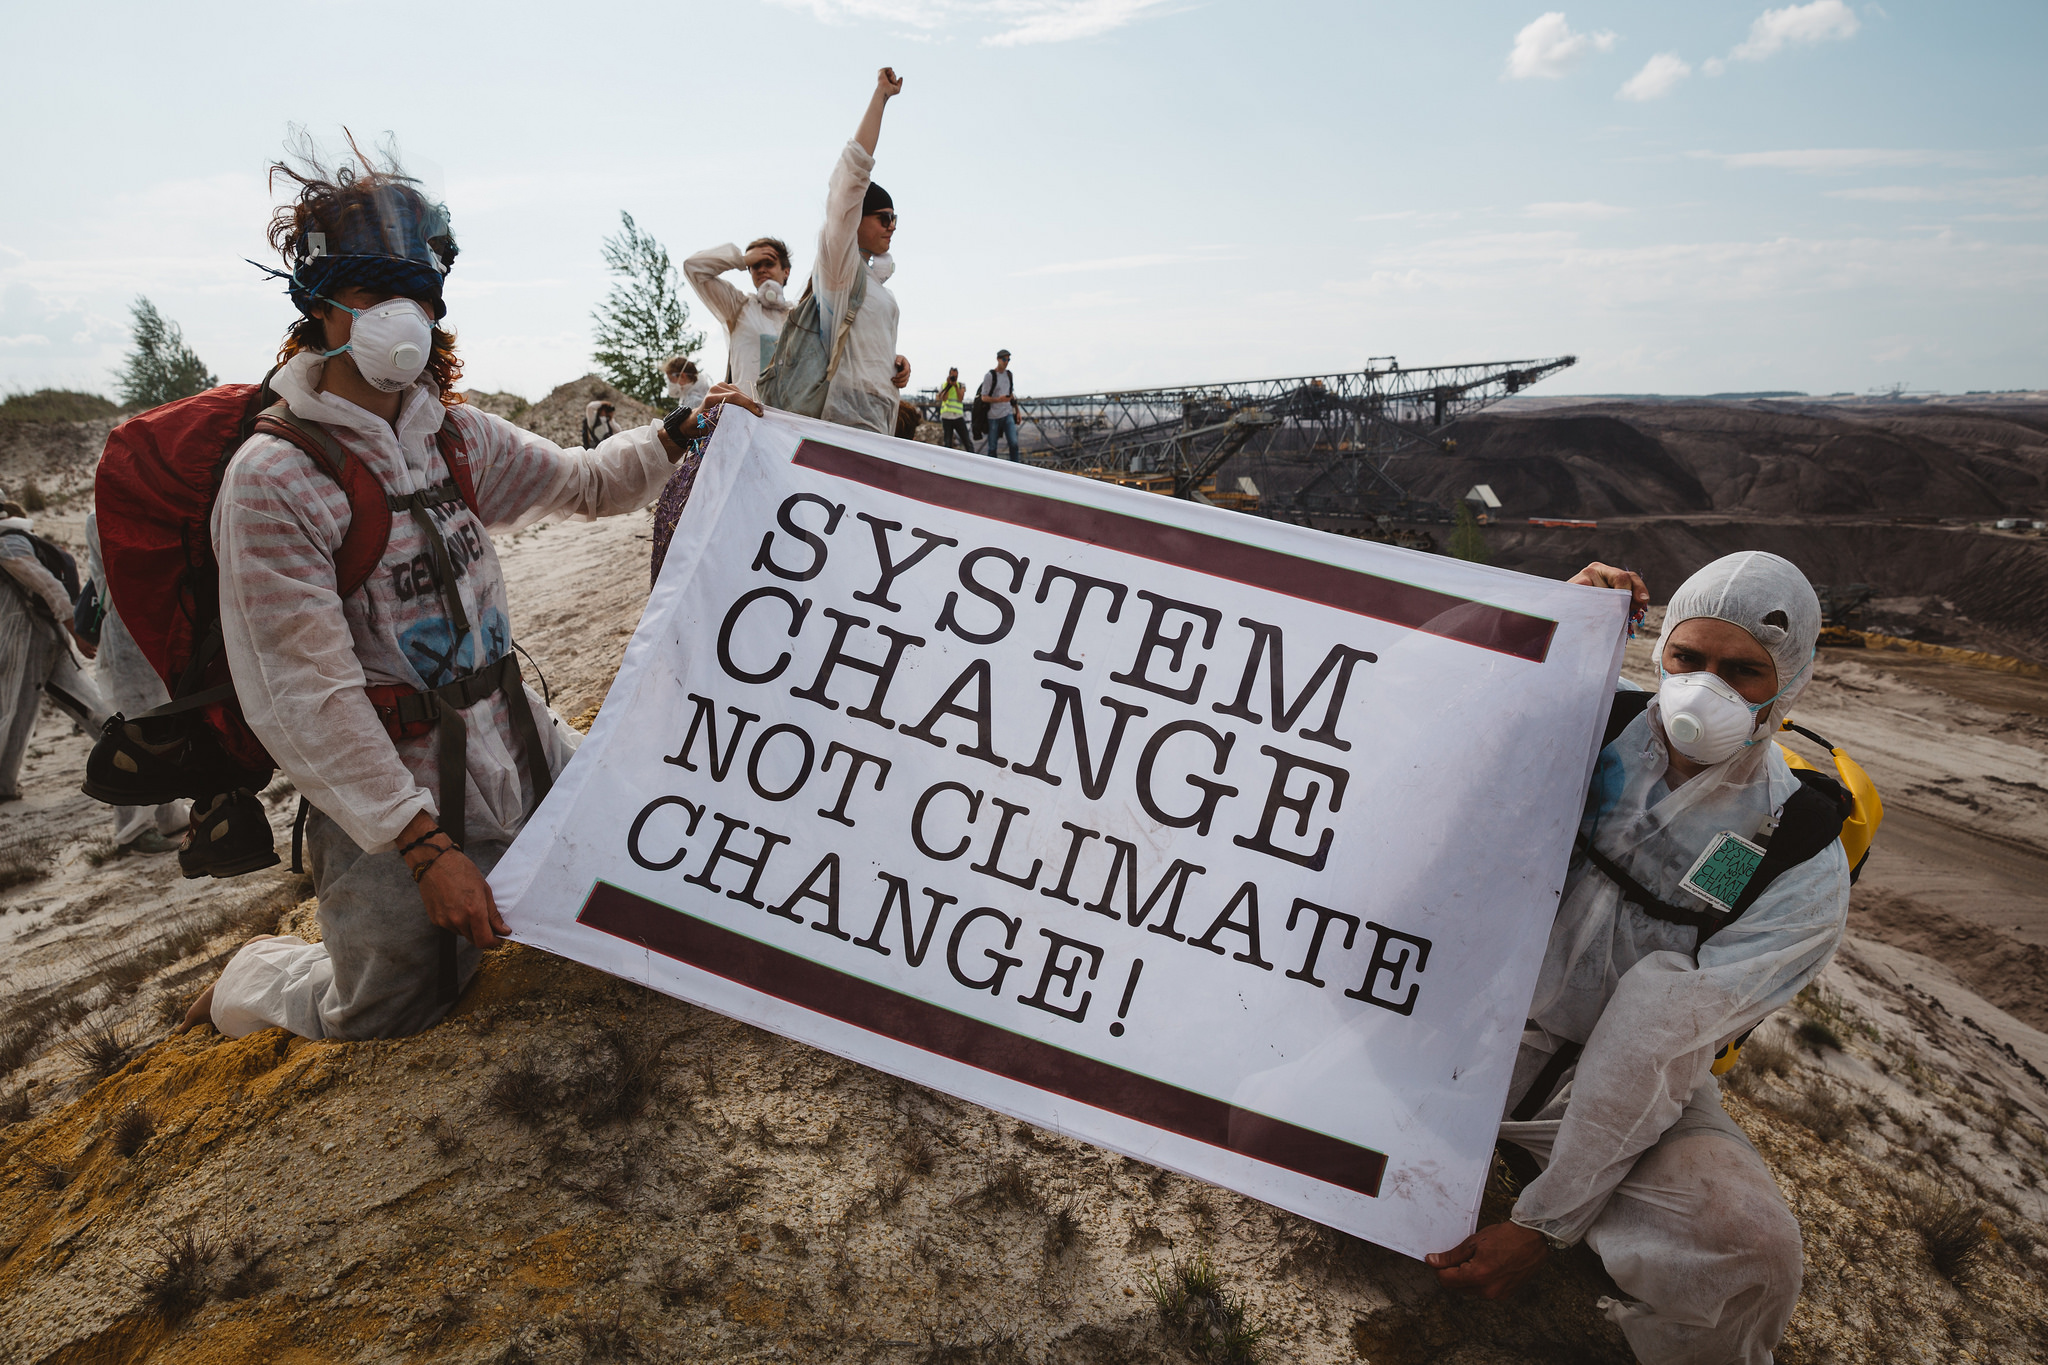 Ende Gelände: Day 1 - Climate activists shut down one of Europe's largest opencast lignite mines